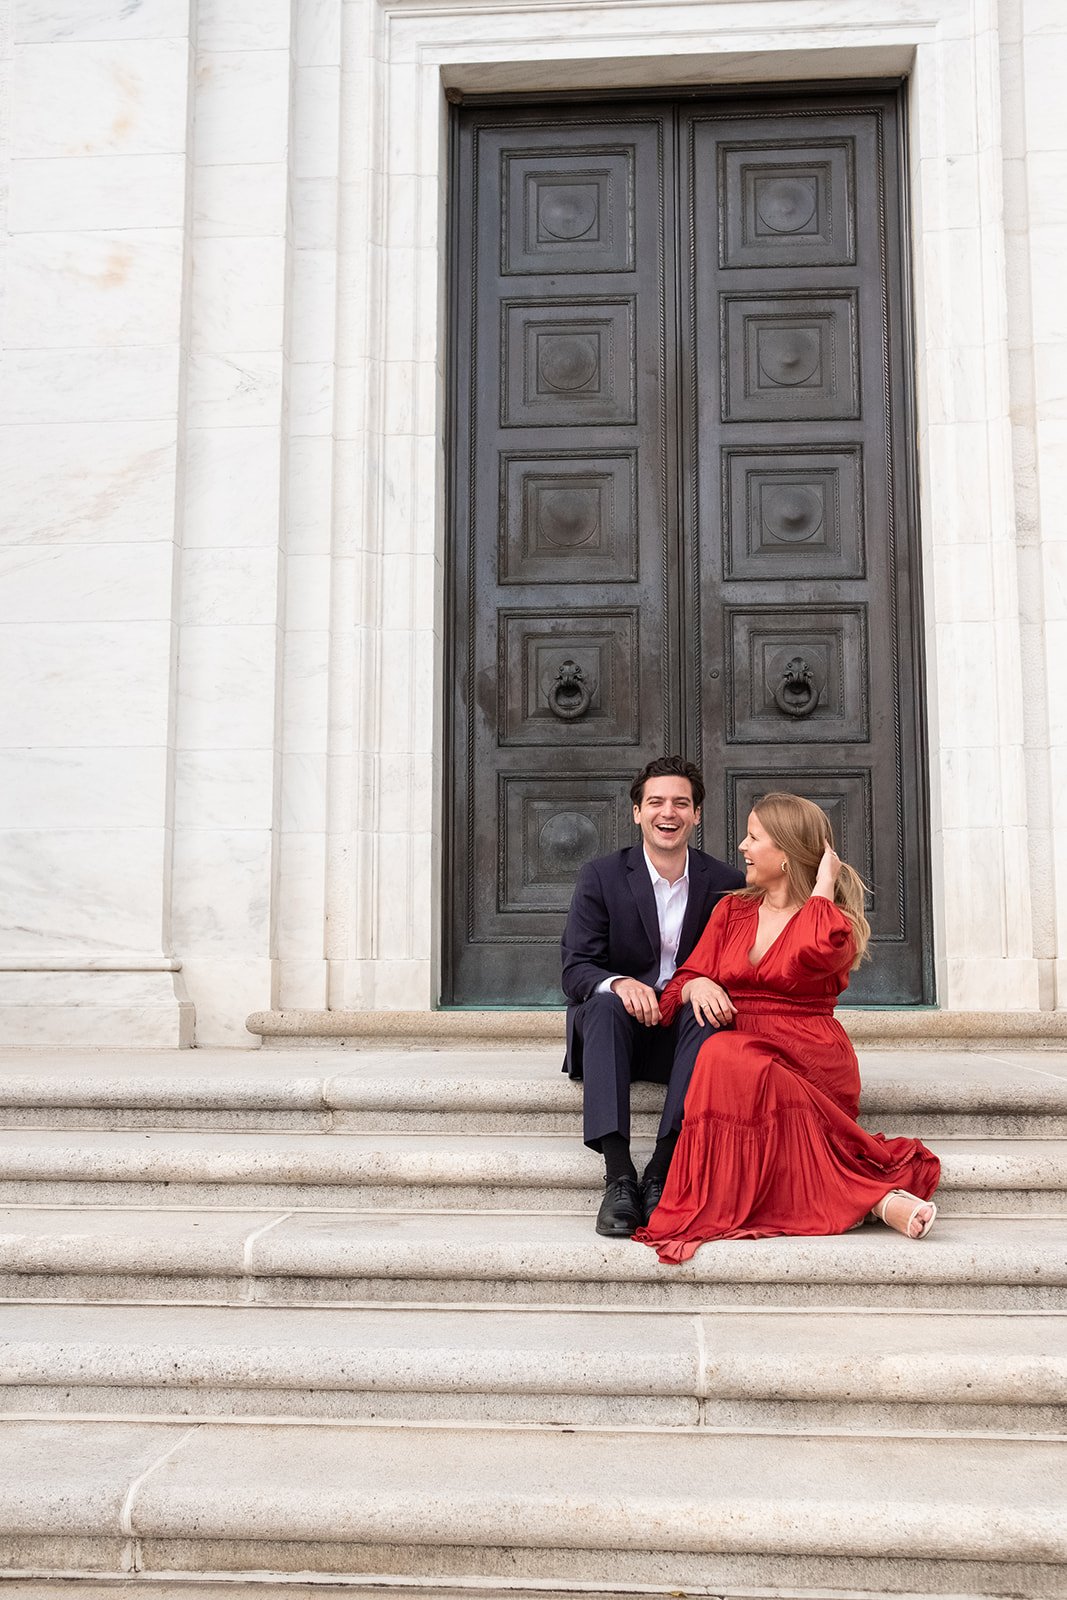 An engaged couple sits in front of the bronze doors at the American Institute of Pharmacy Building in Washington, DC.